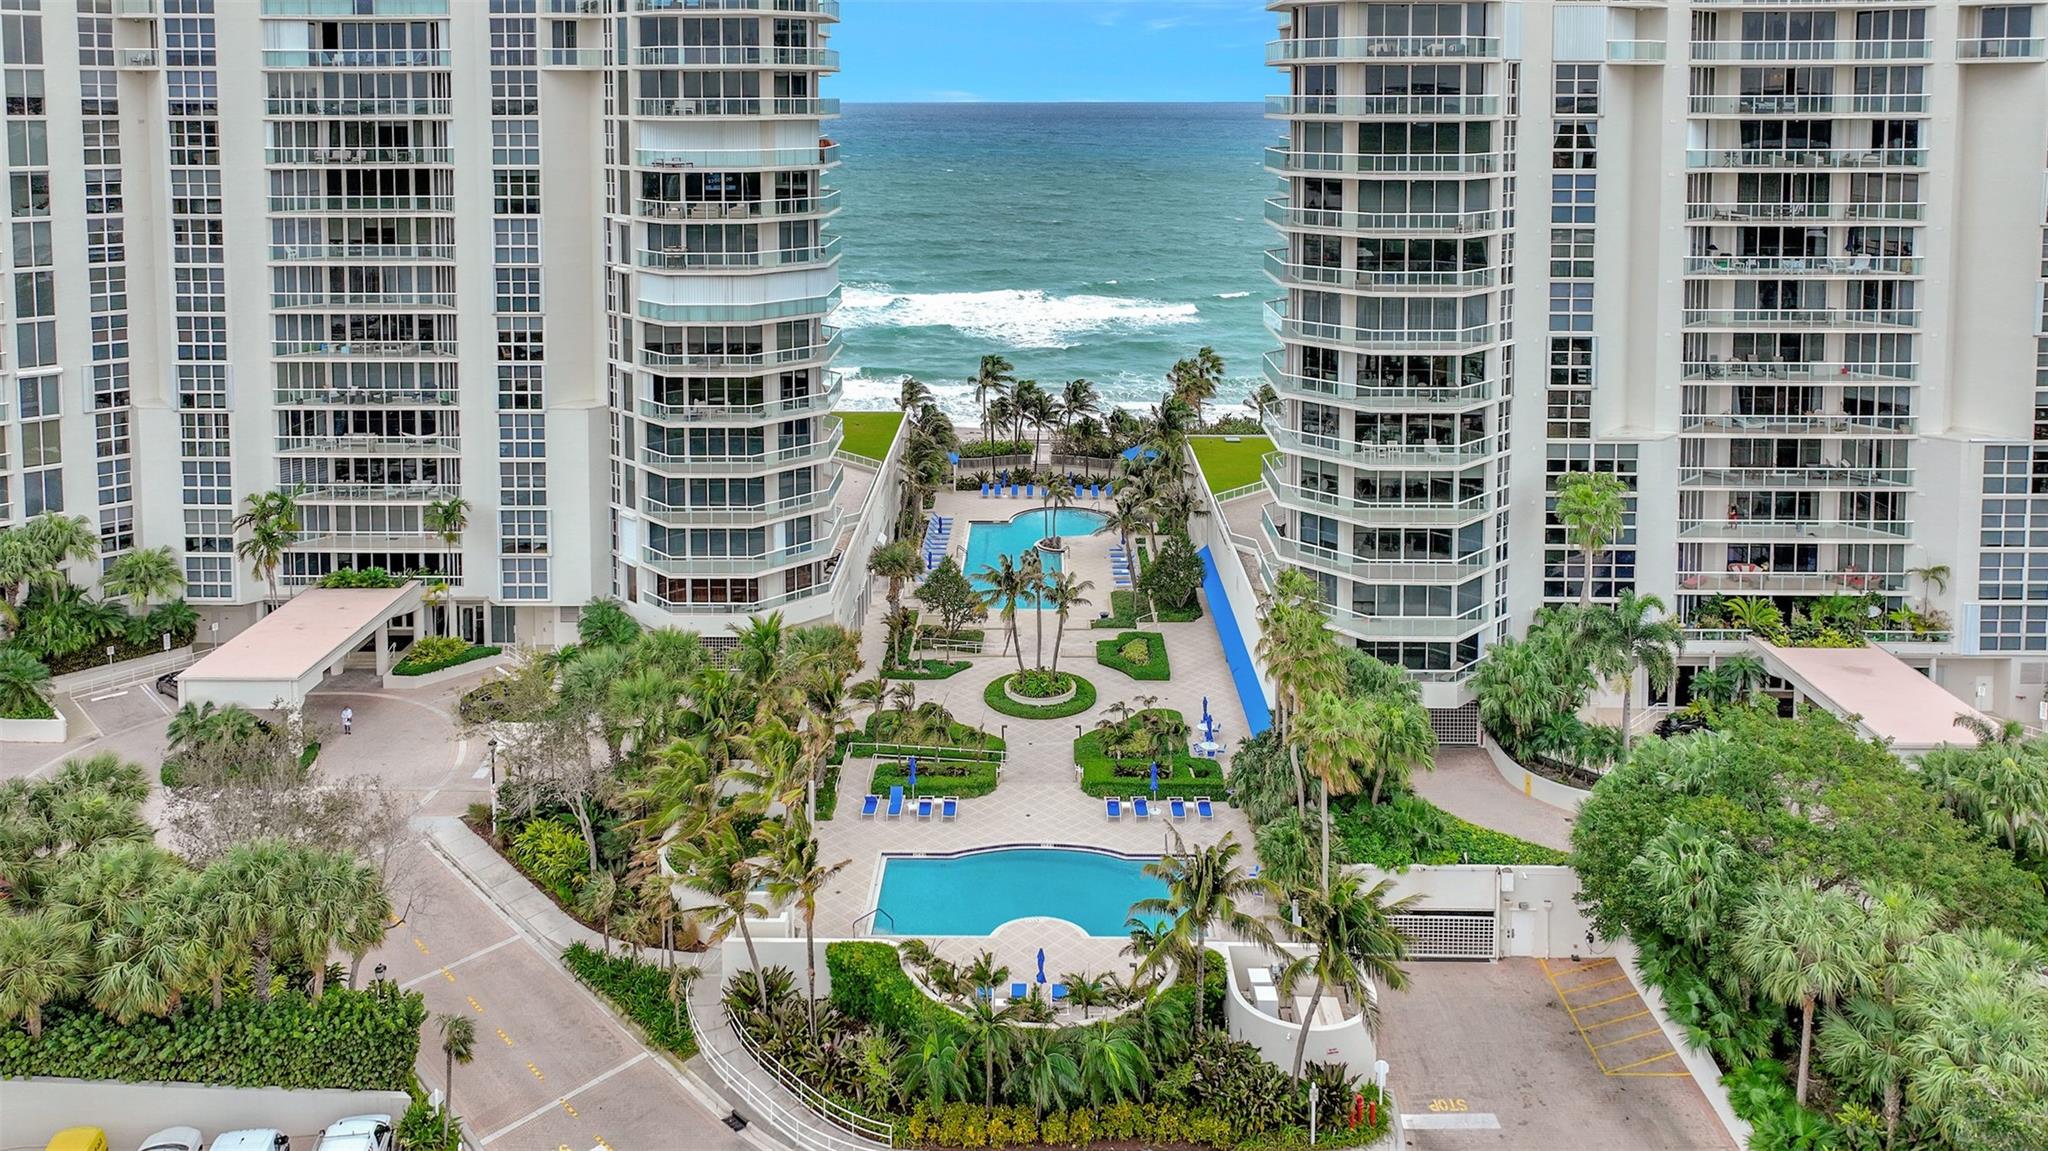 Beautiful unit is locating on the East side of the Ocean Drive on the beach in a 5 stars luxury high rise building next to the park. This is a furnished 2 Bedroom + den/office or 3rd Bedroom, 2.5 Baths. Large Balcony spans entire unit. Pool area has 2 heated pools. Jacuzzi and private beach with chairs and umbrellas. Walk path to the Hollywood stores and Restaurants. Gym. Concierge, 24 h security. 2 tennis courts, sauna, steam. 24 hours valet parking, car wash available in building. Laundry in unit. 5 MONTH LEASE AVAILBILITY OR LONGER DEPENDING ON EXECUTION OF LEASE. Contact Brandi first to view property or Les Waites if not available. Non-smoker and NO pets please. Available Jan 2,2024